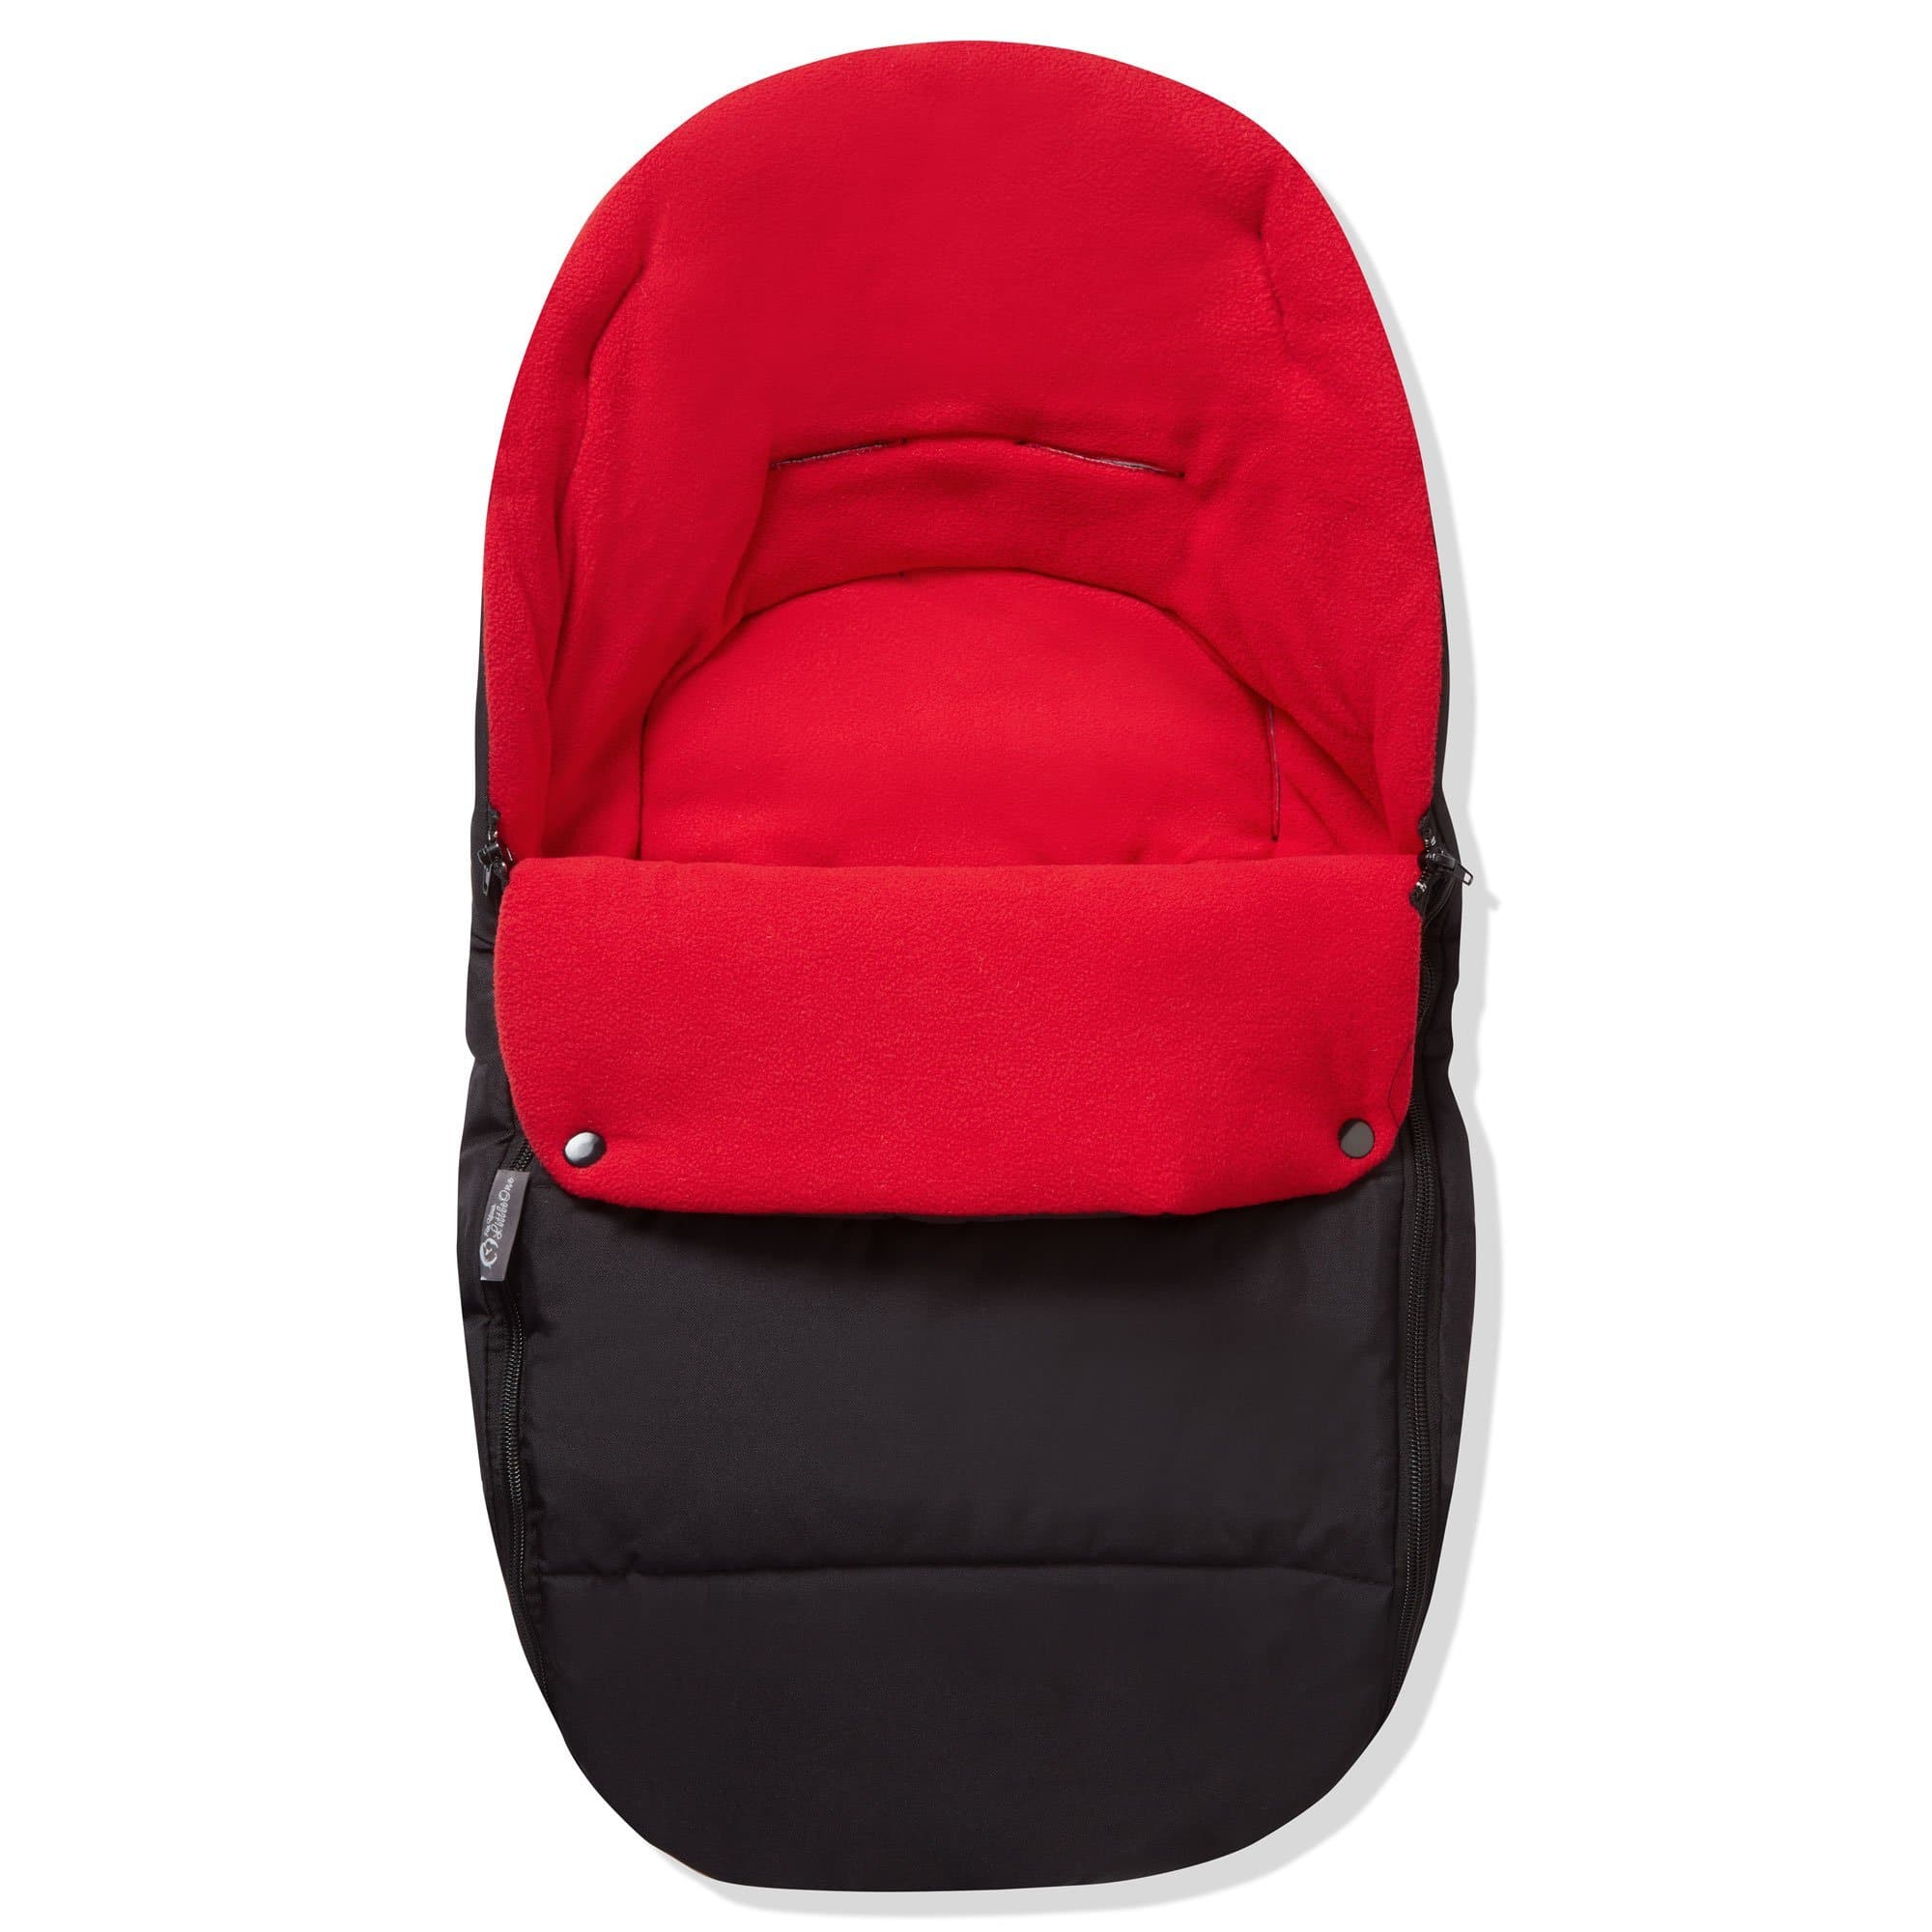 Cybex Cloud T i-Size Car Seat & Isofix Base - Sepia Black - End of Jan —  Just Another Baby?